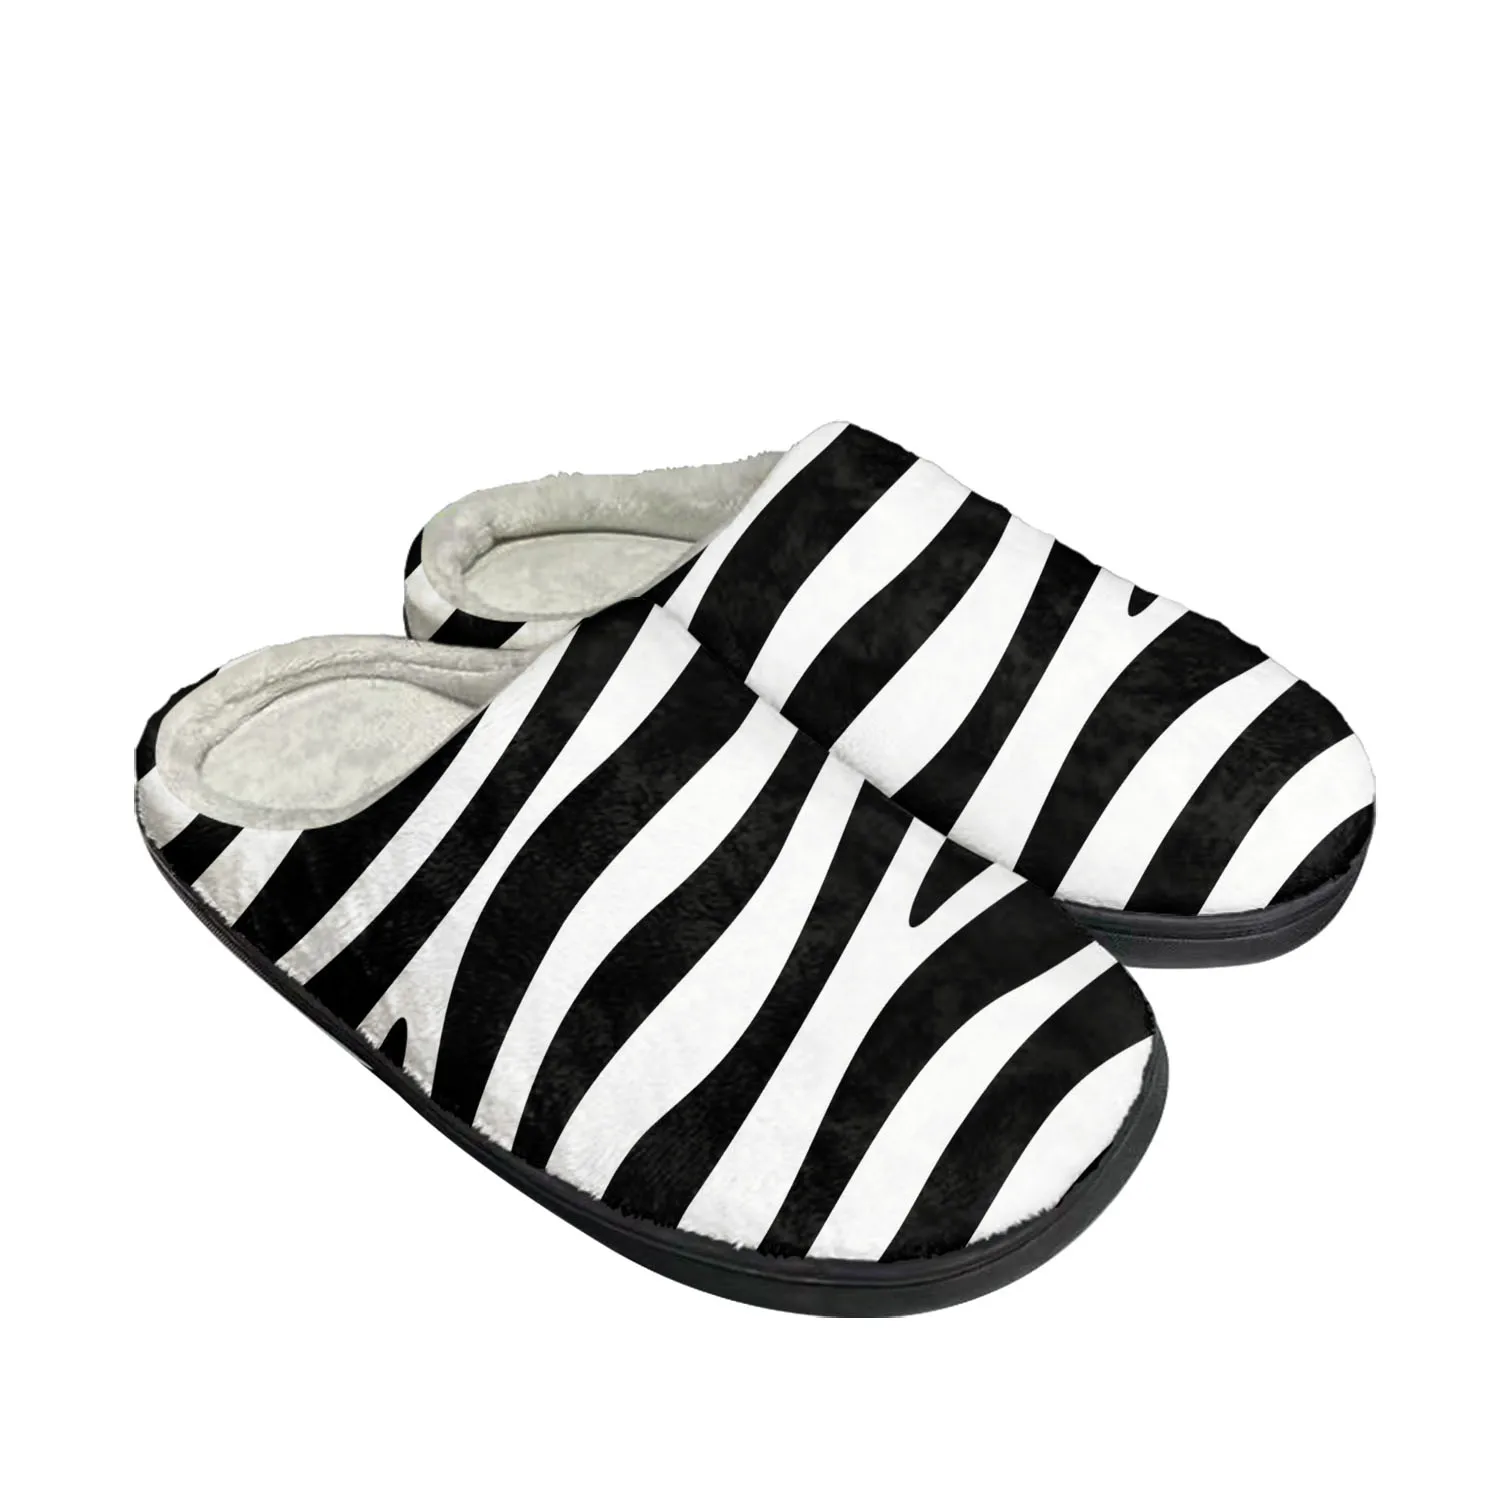 

Fashion 3D Zebra Print Home Cotton Custom Slippers Mens Womens Sandals Tide Printed Causal Plush Bedroom Shoes Thermal Slipper